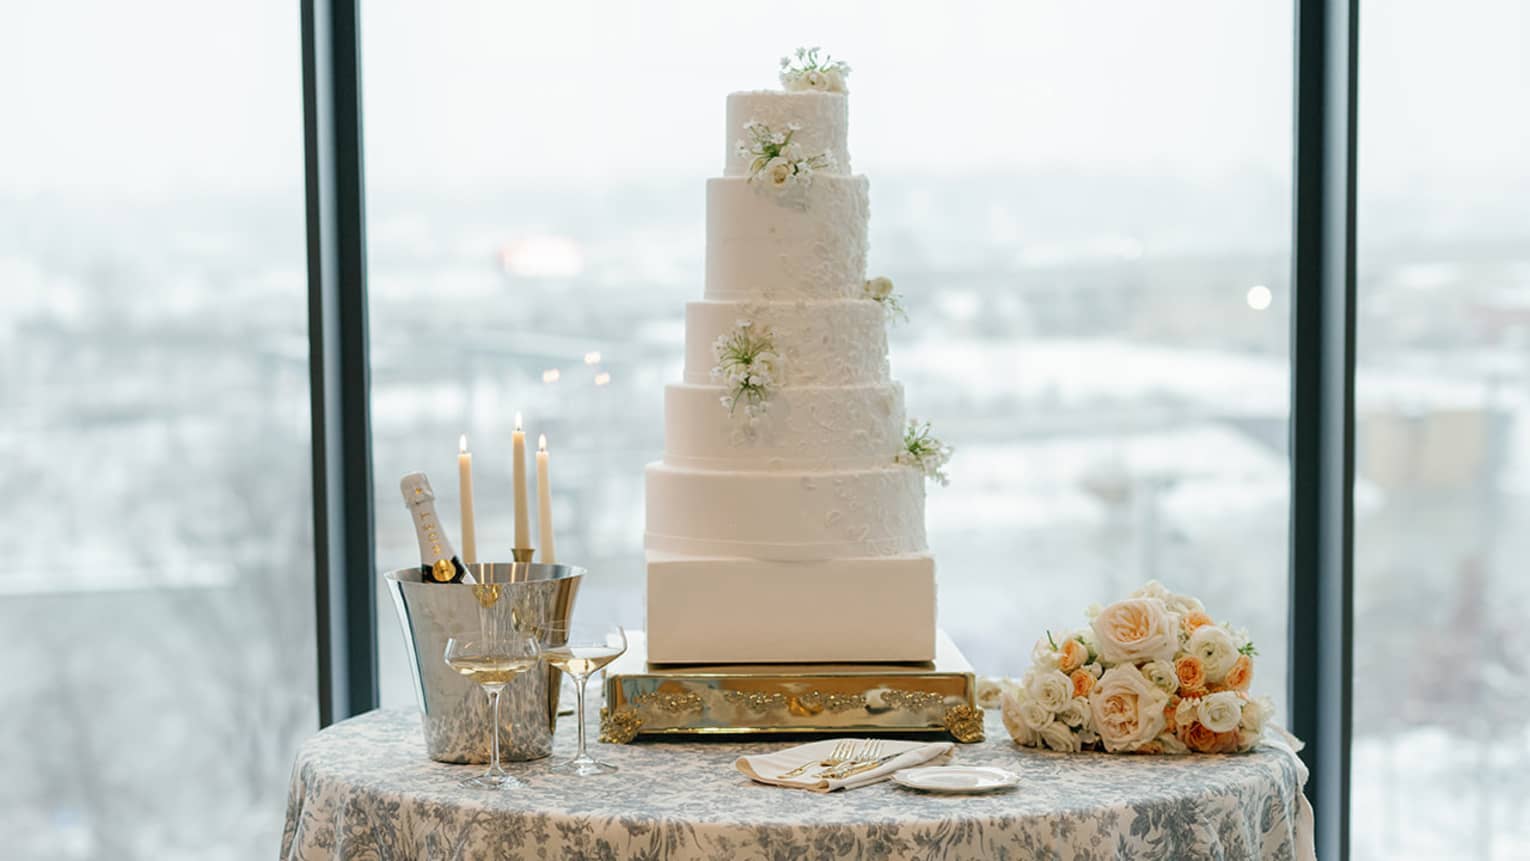 Five-layer wedding cake on top of table with a blue floral tablecloth.